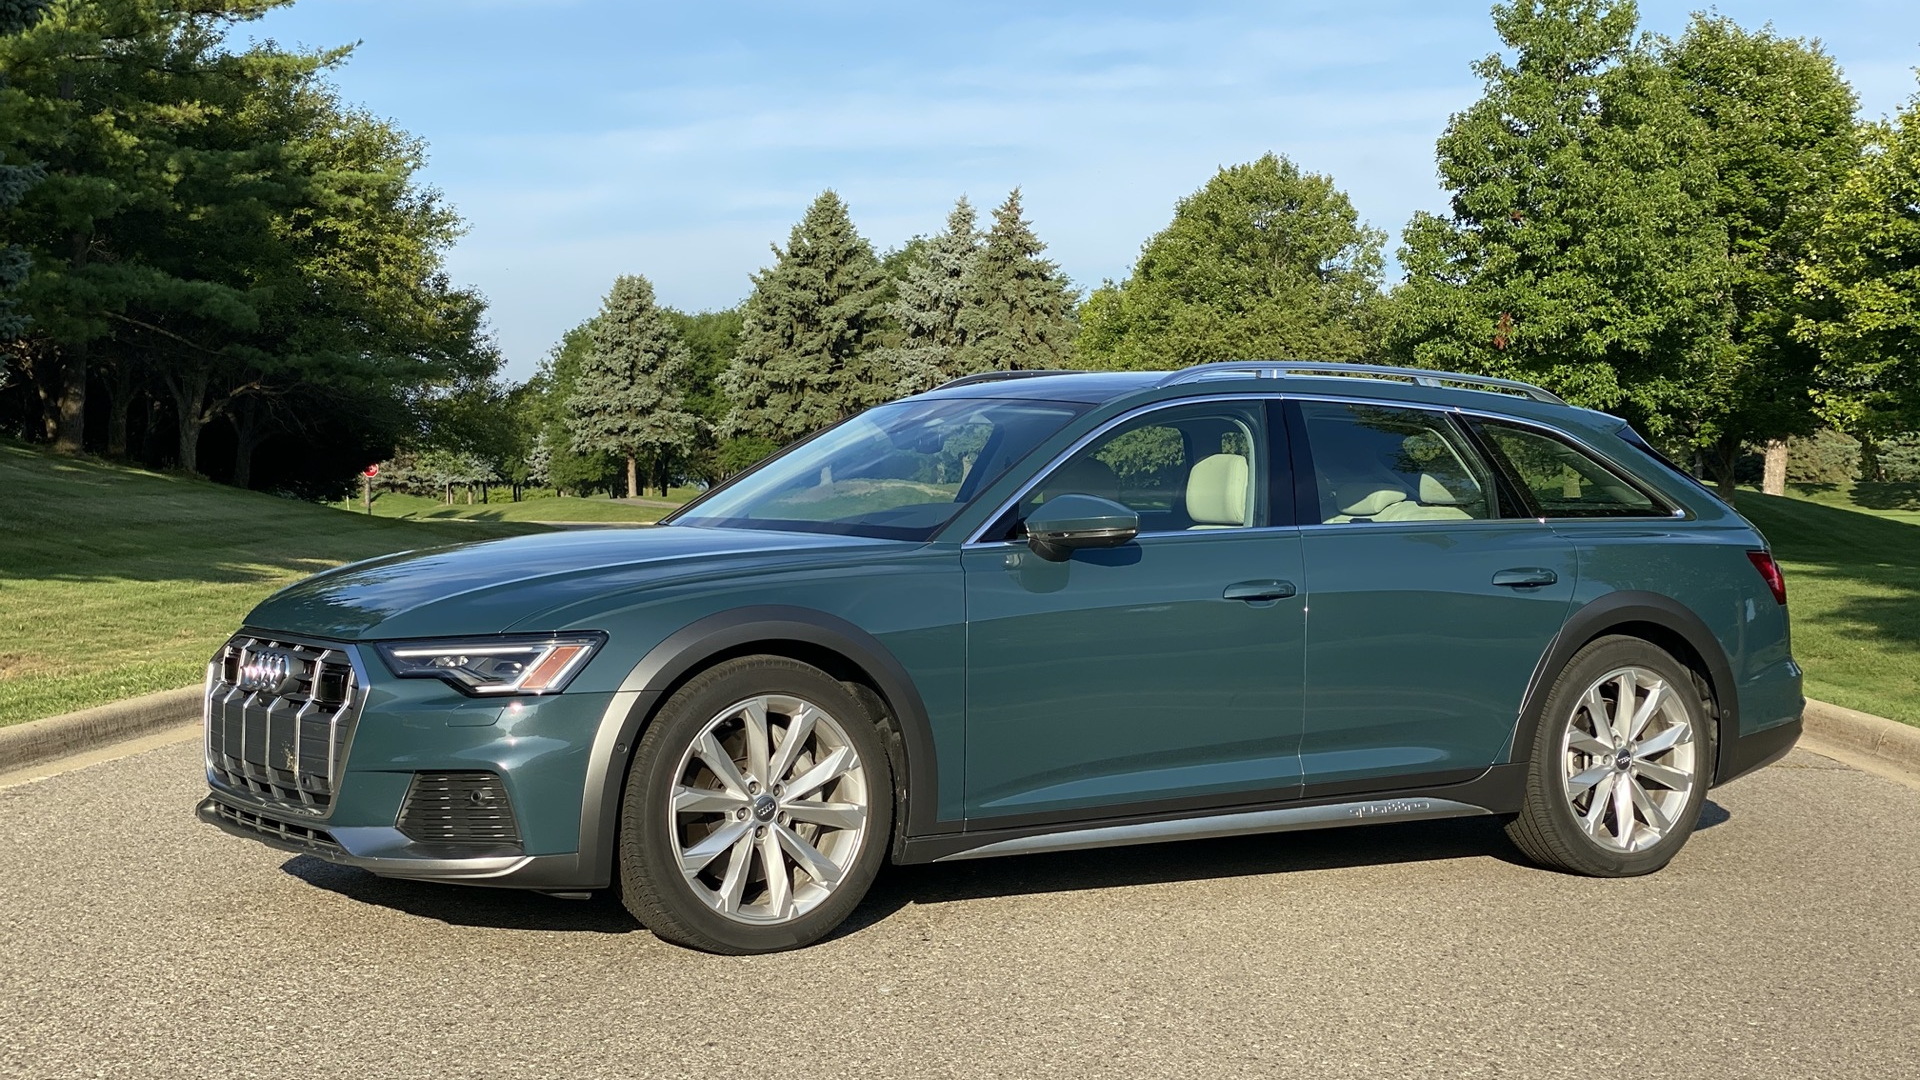 First drive review: 2020 Audi A6 Allroad cures the crossover blues